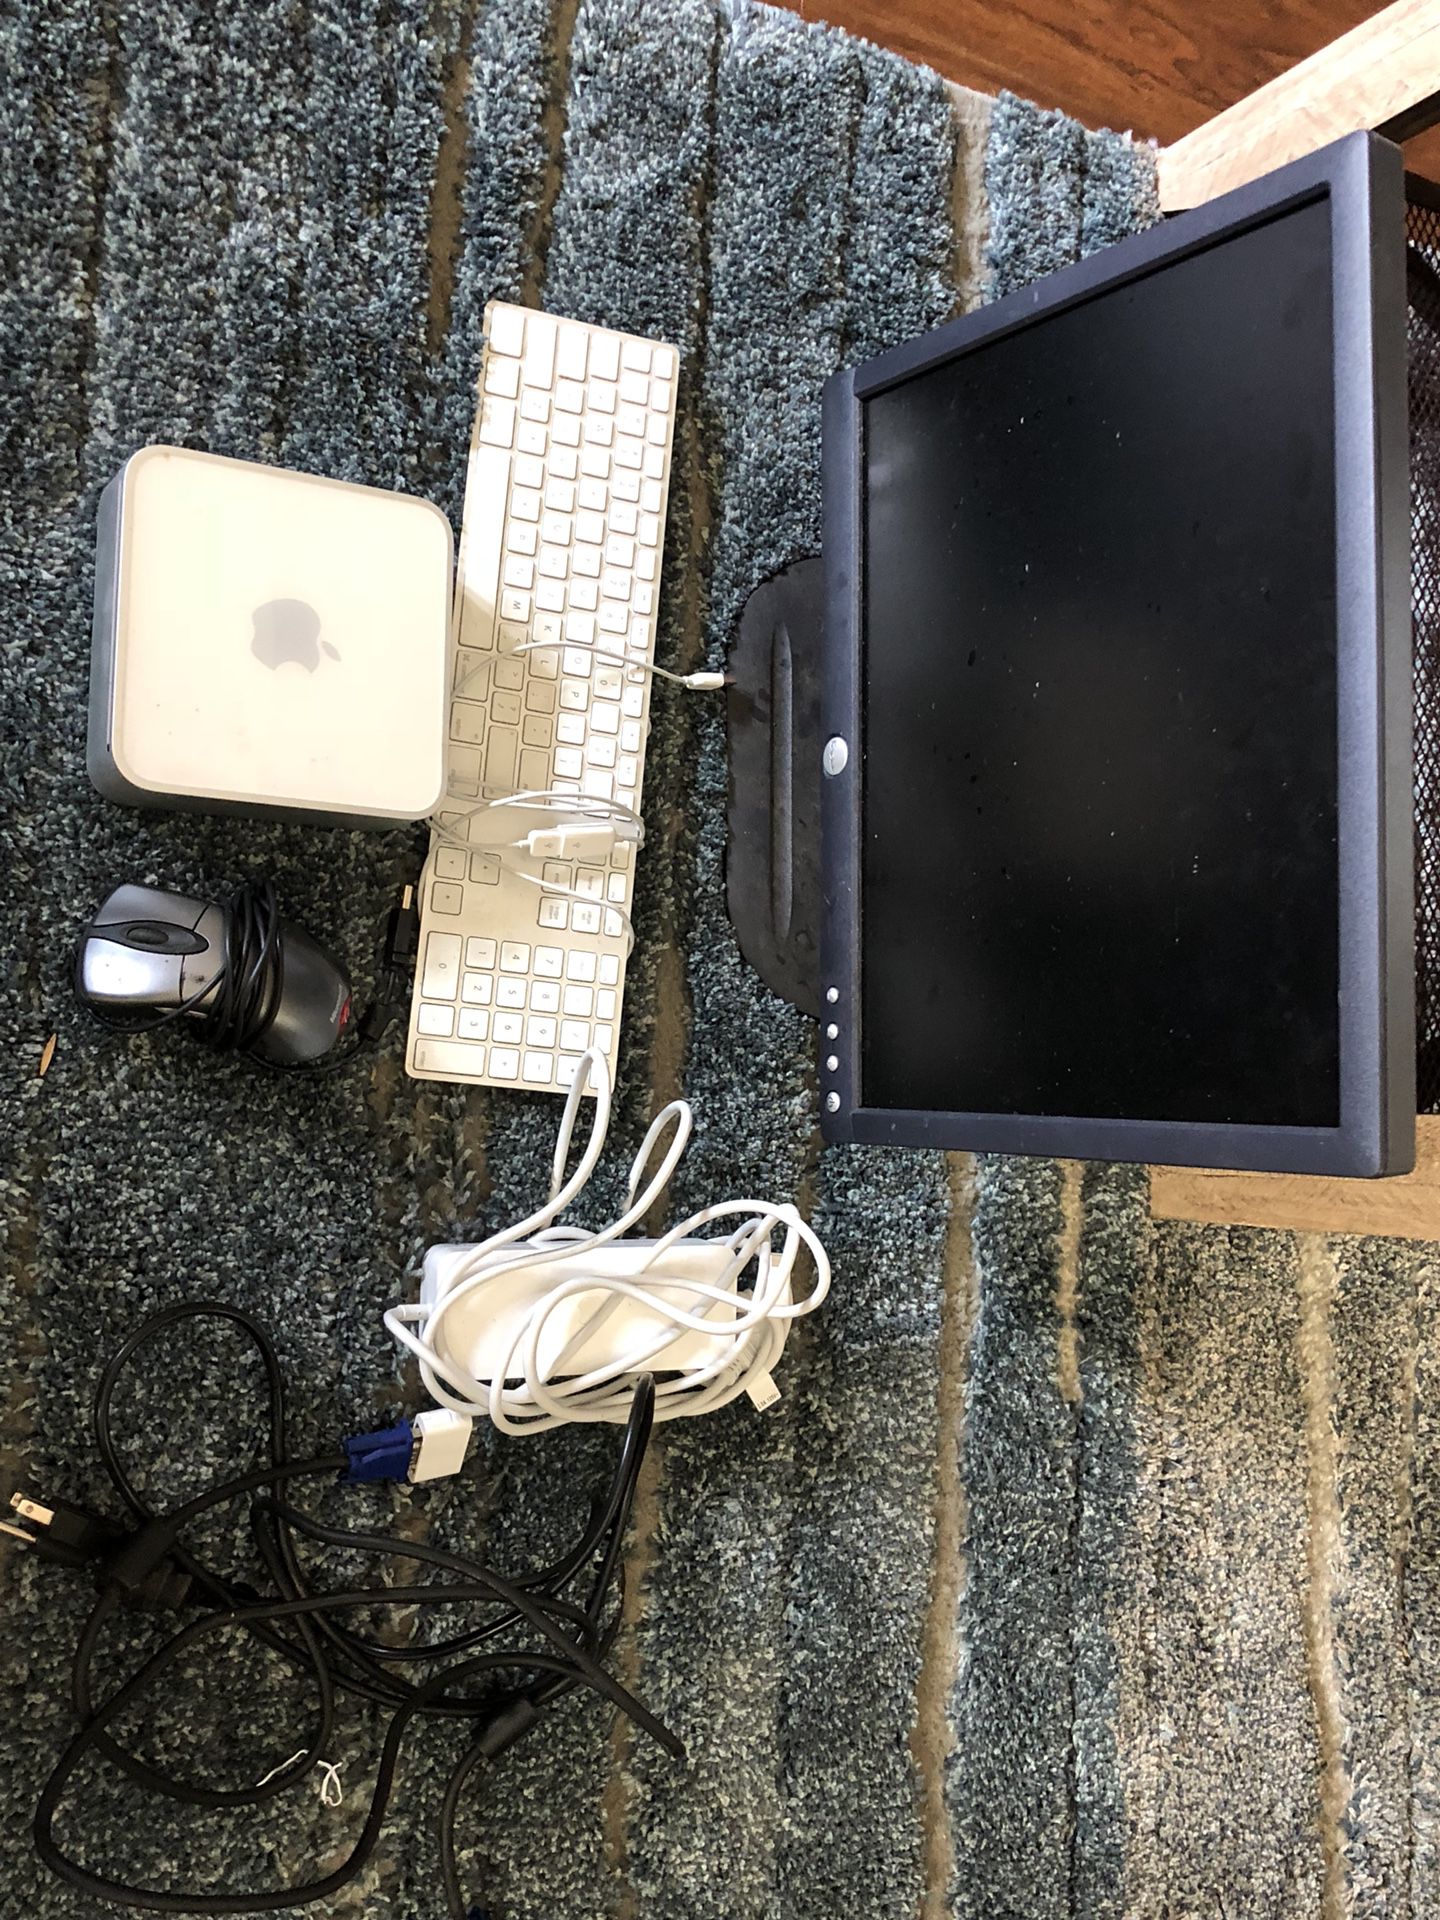 Apple computer for sale